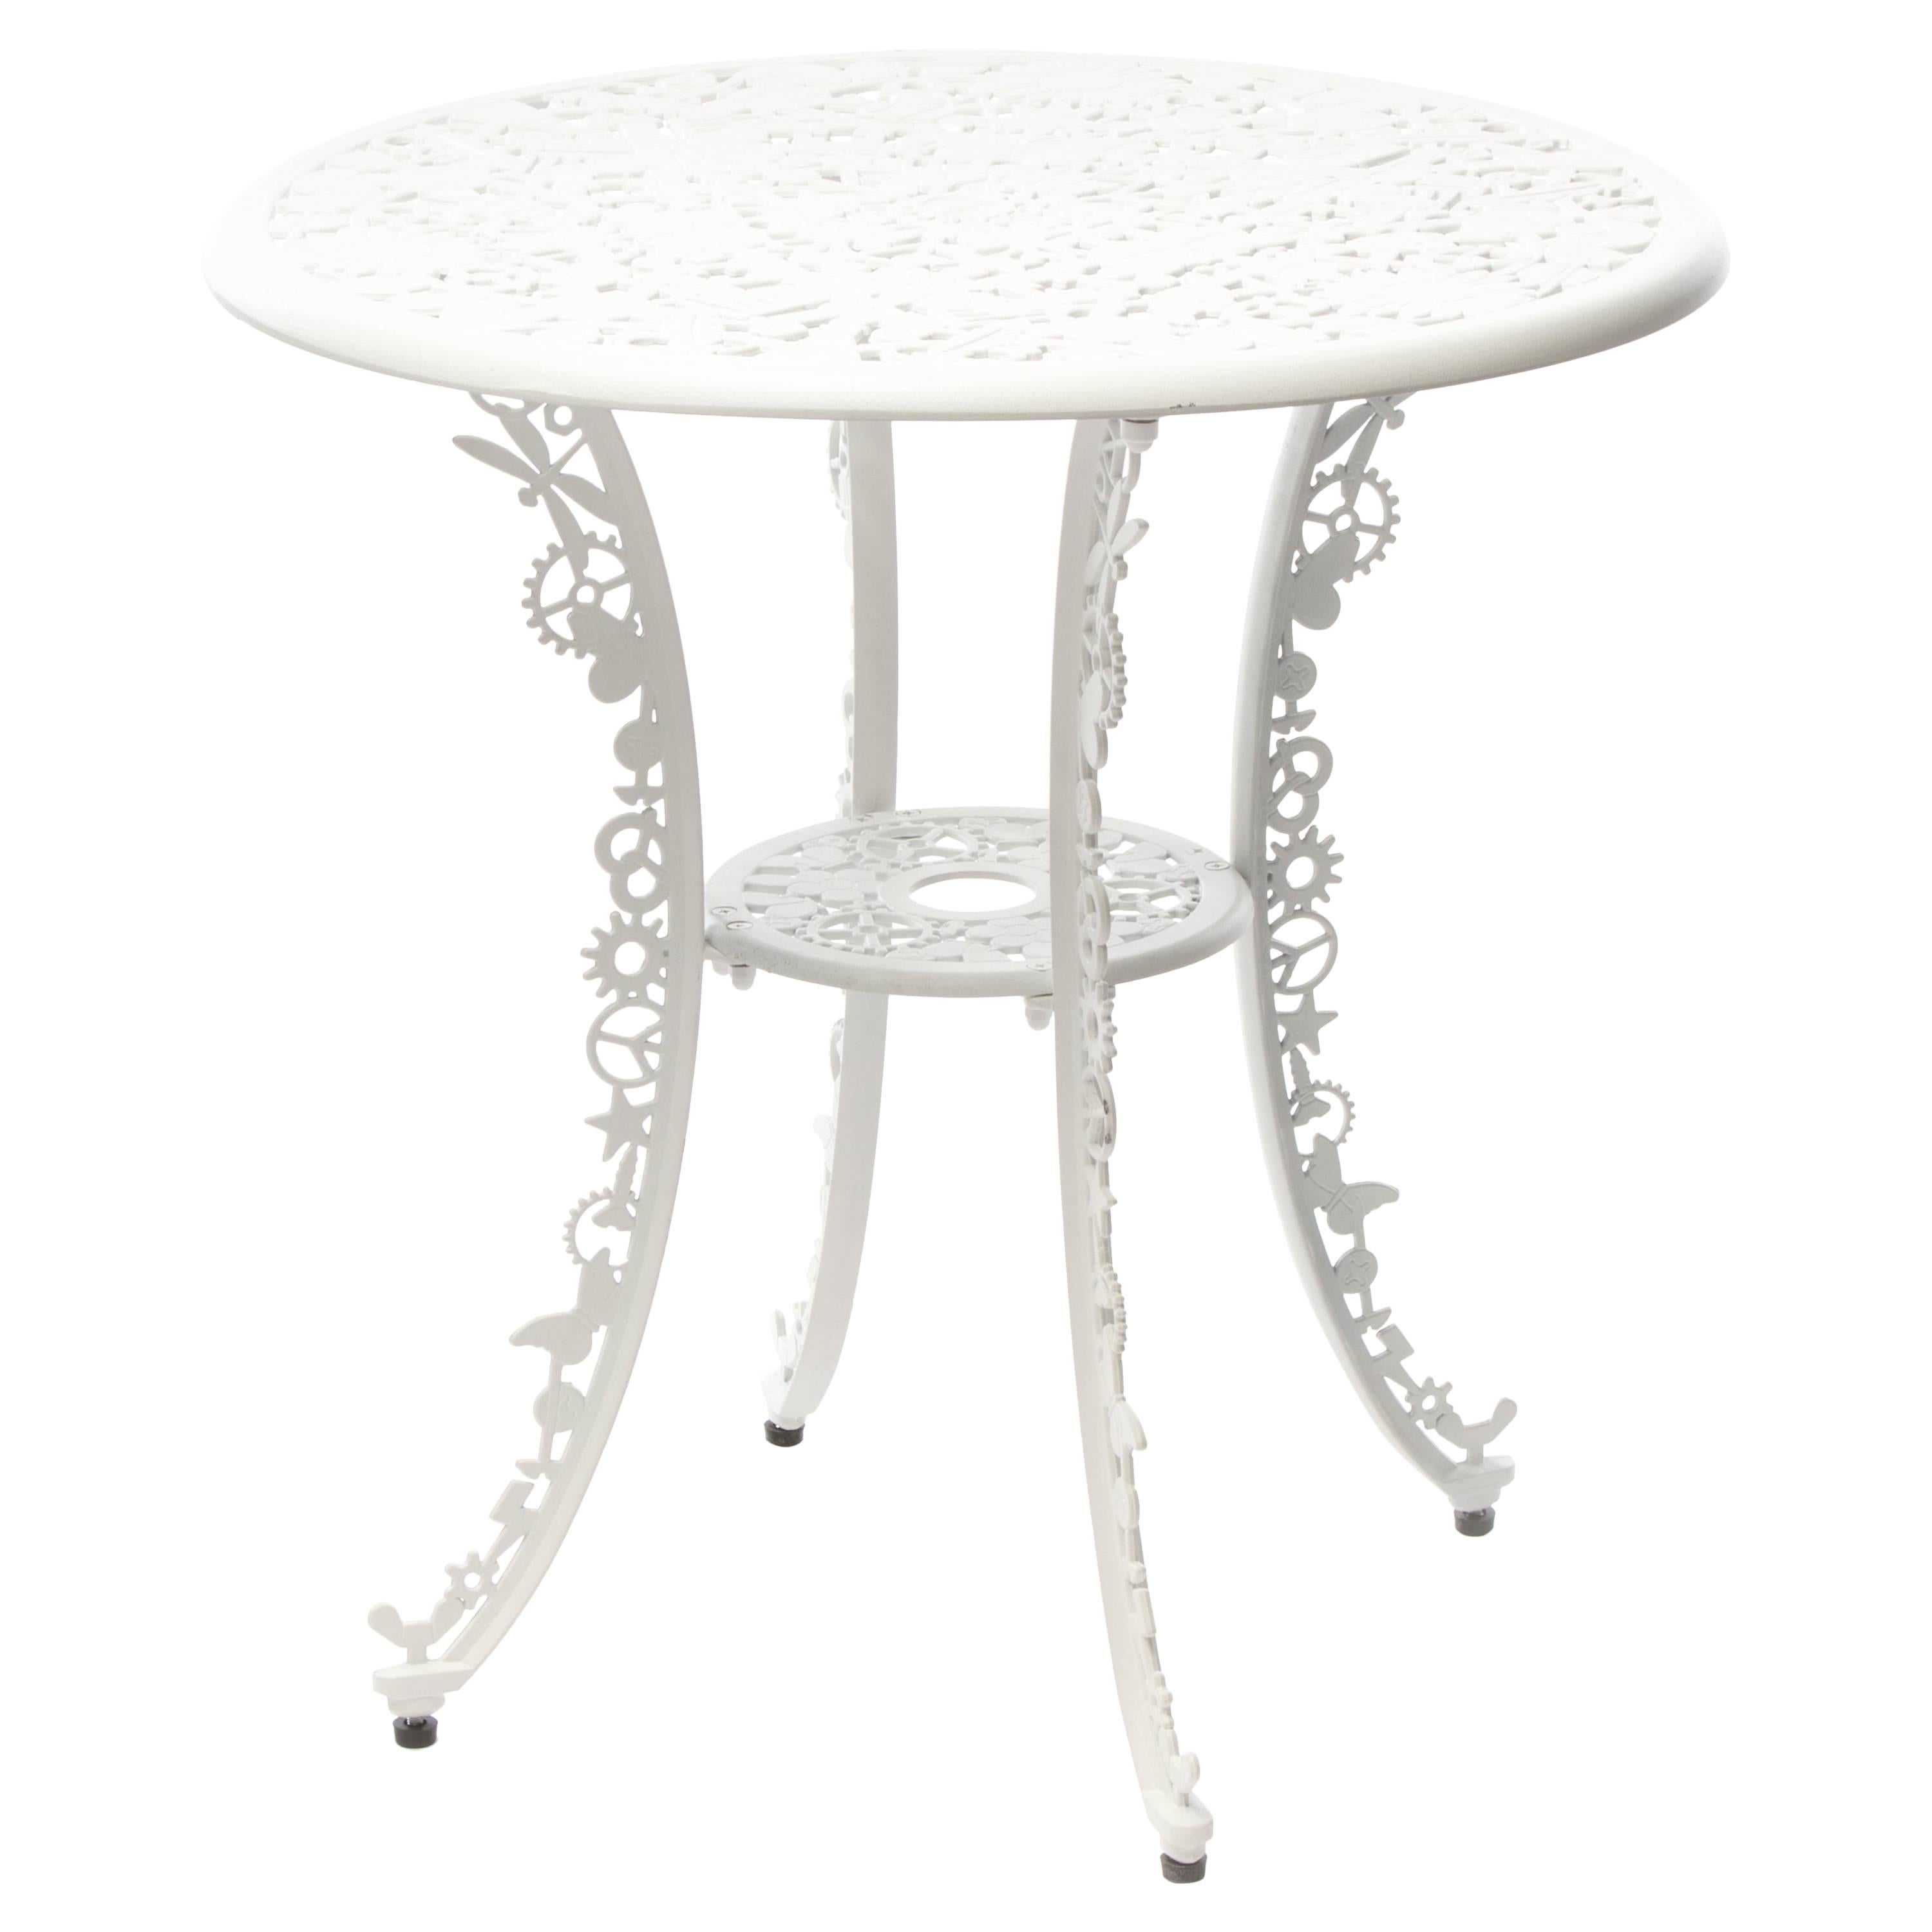 Aluminum Table "Industry Garden Furniture" by Seletti, White